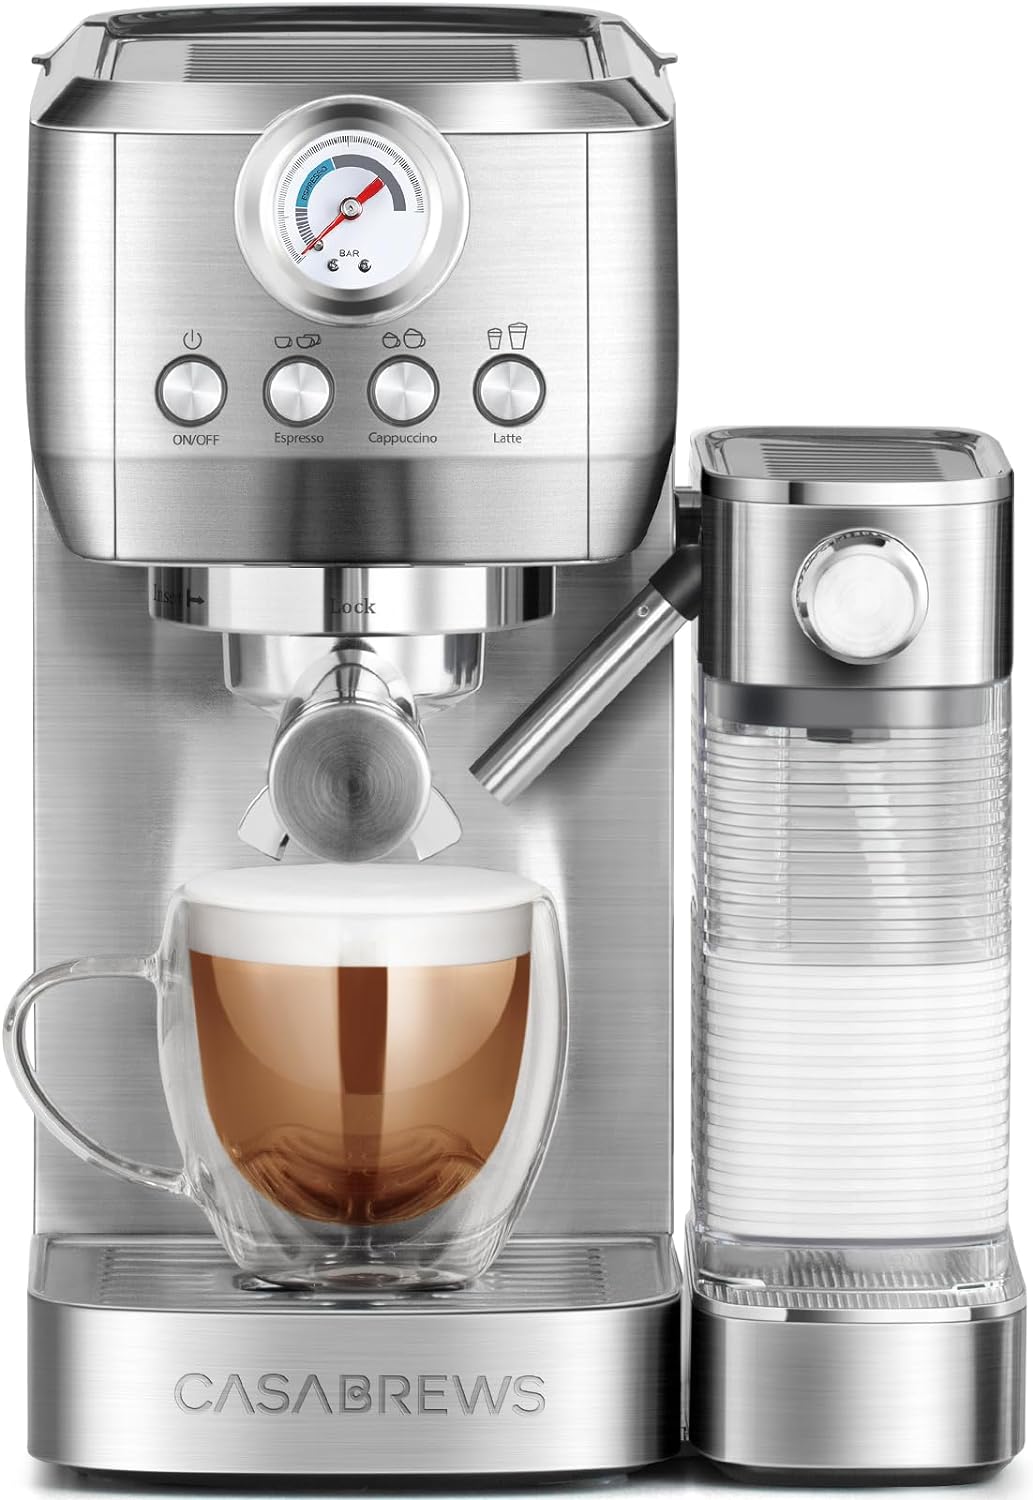 CASABREWS Espresso Machine 20 Bar, Compact Cappuccino Machine with Automatic Milk Frother, Stainless Steel Espresso Maker with 49 oz Detachable Water Tank for Latte or Macchiato, Gift for Coffee Lover